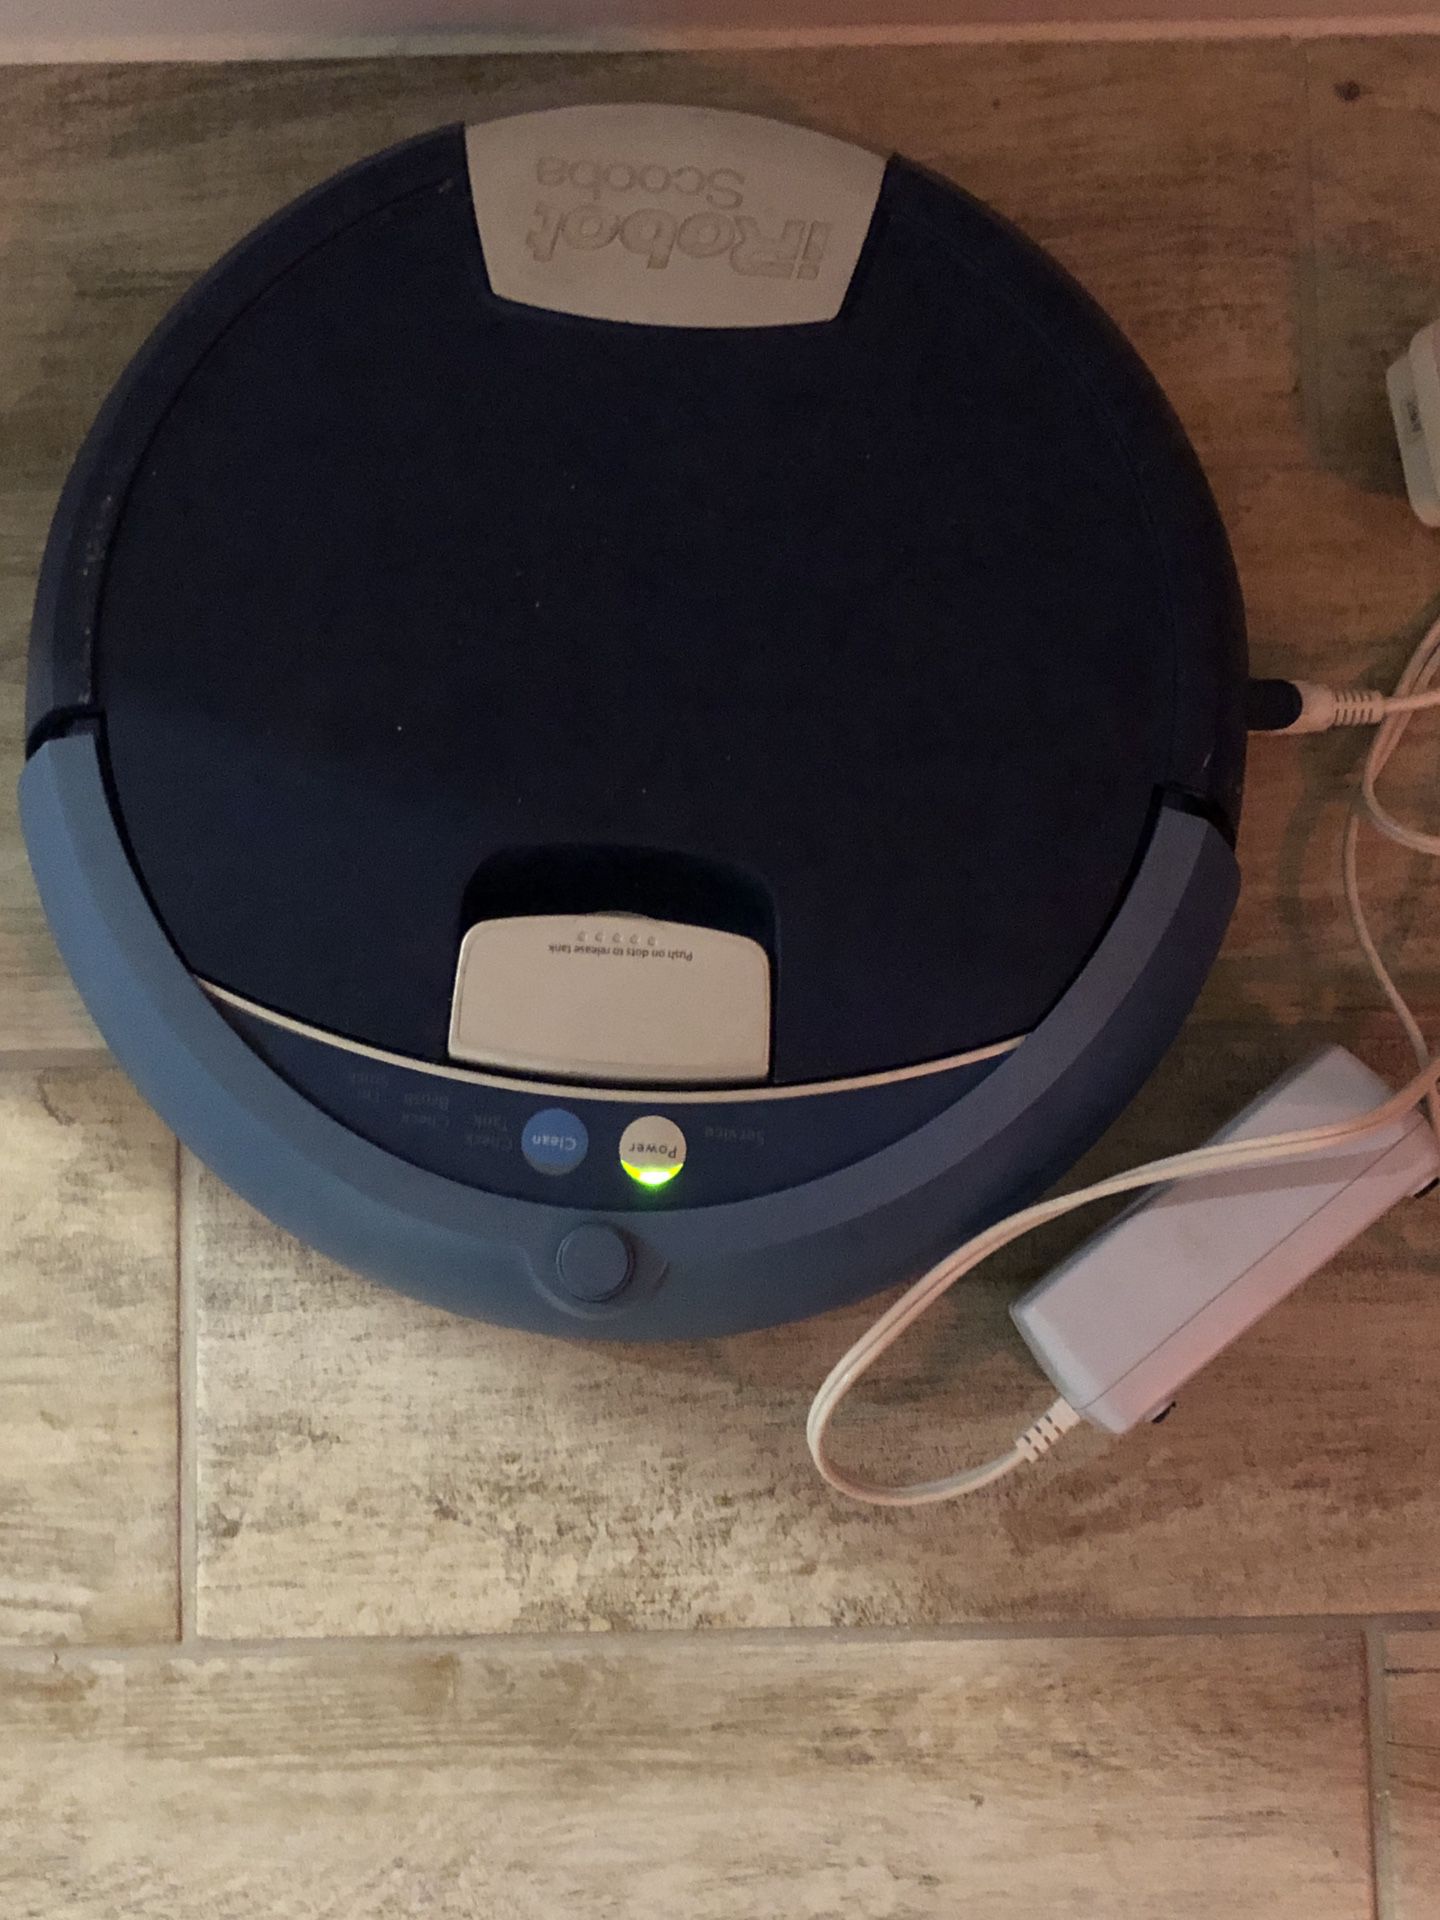 Scooba by iRobot ( Floor Washer Version of Roomba)